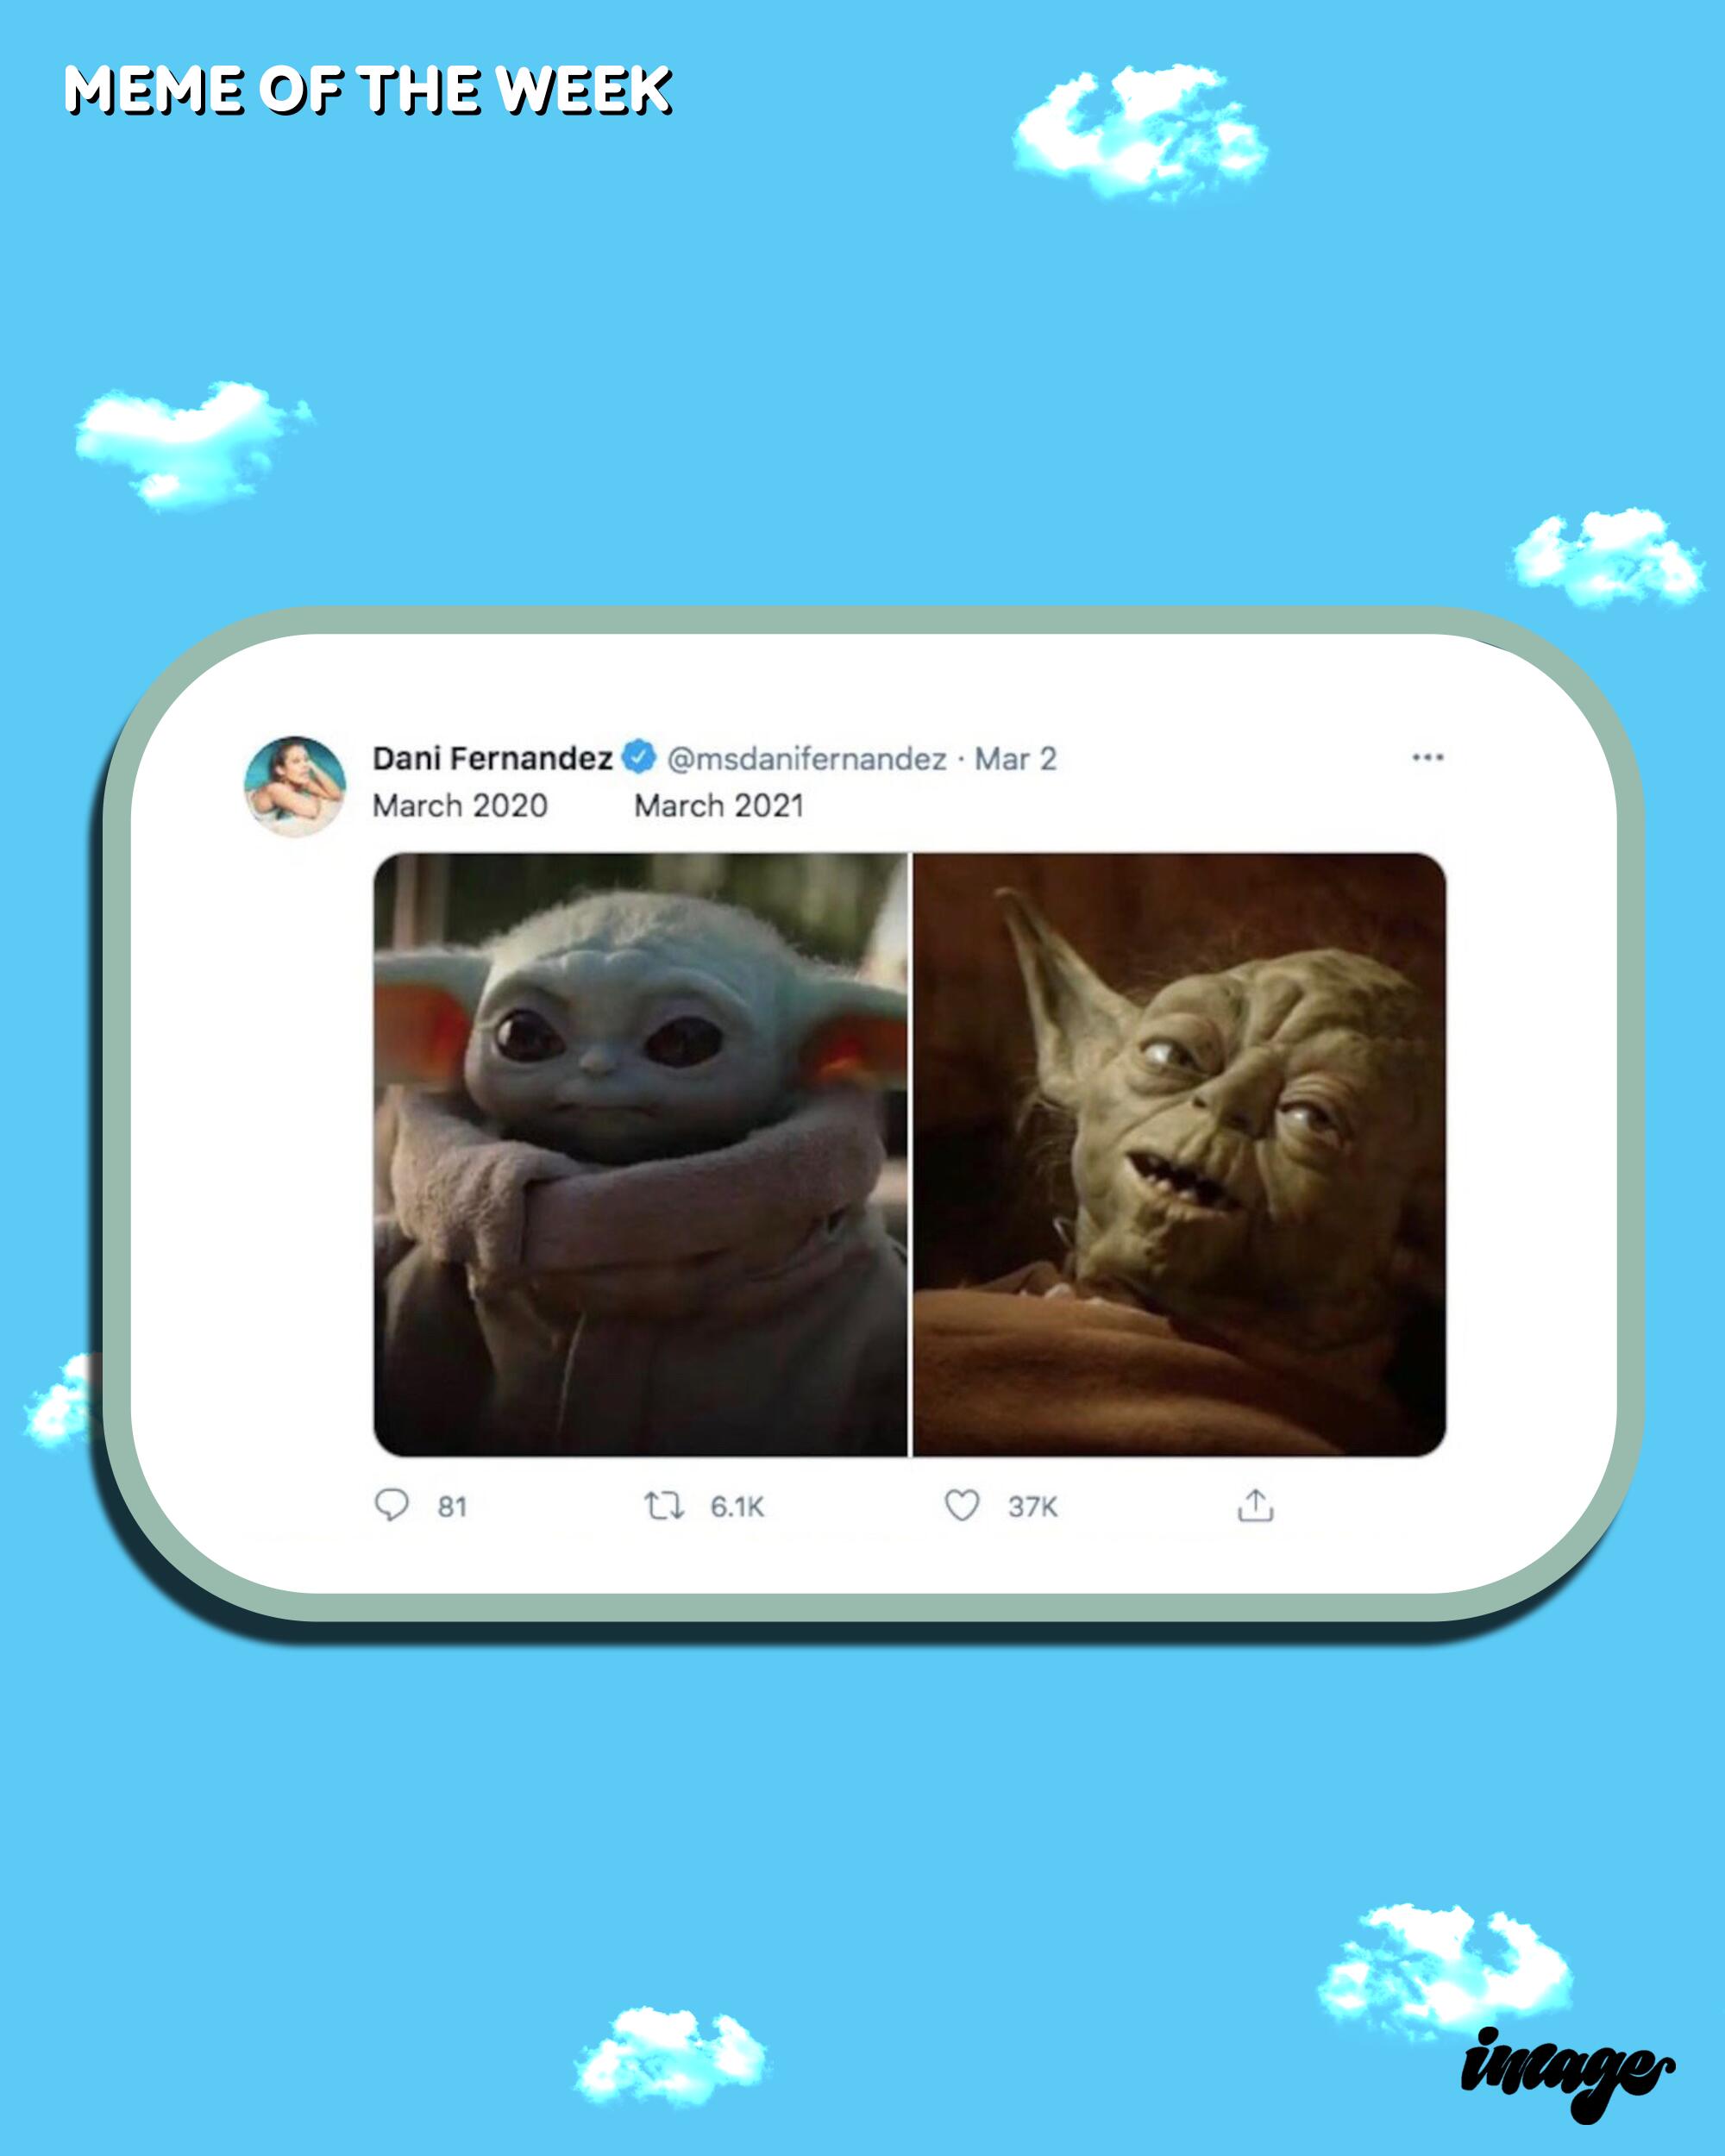 Side-by-side photos of Baby Yoda and Yoda in a meme on a cellphone